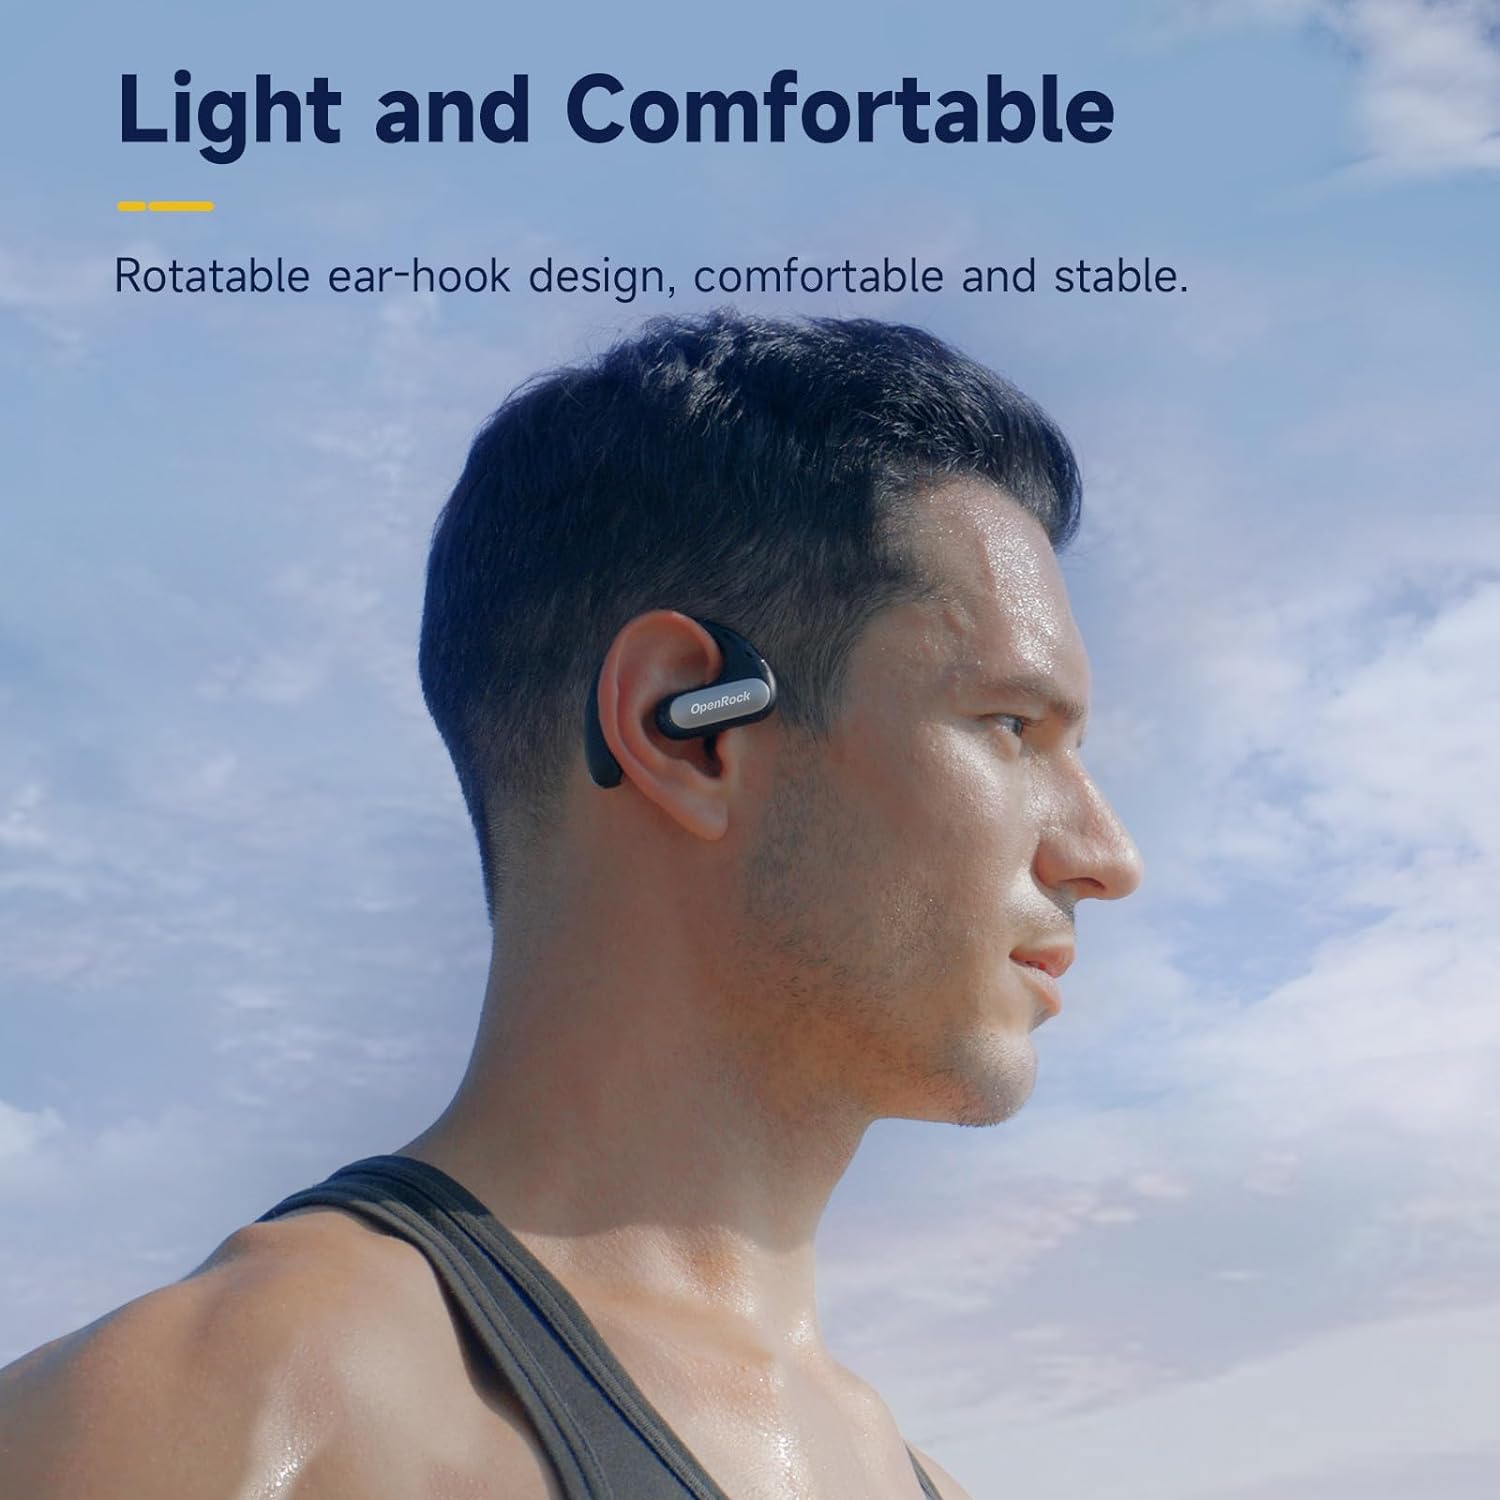 OpenRock Pro by OneOdio Open-Ear Air Conduction Sport Earbuds